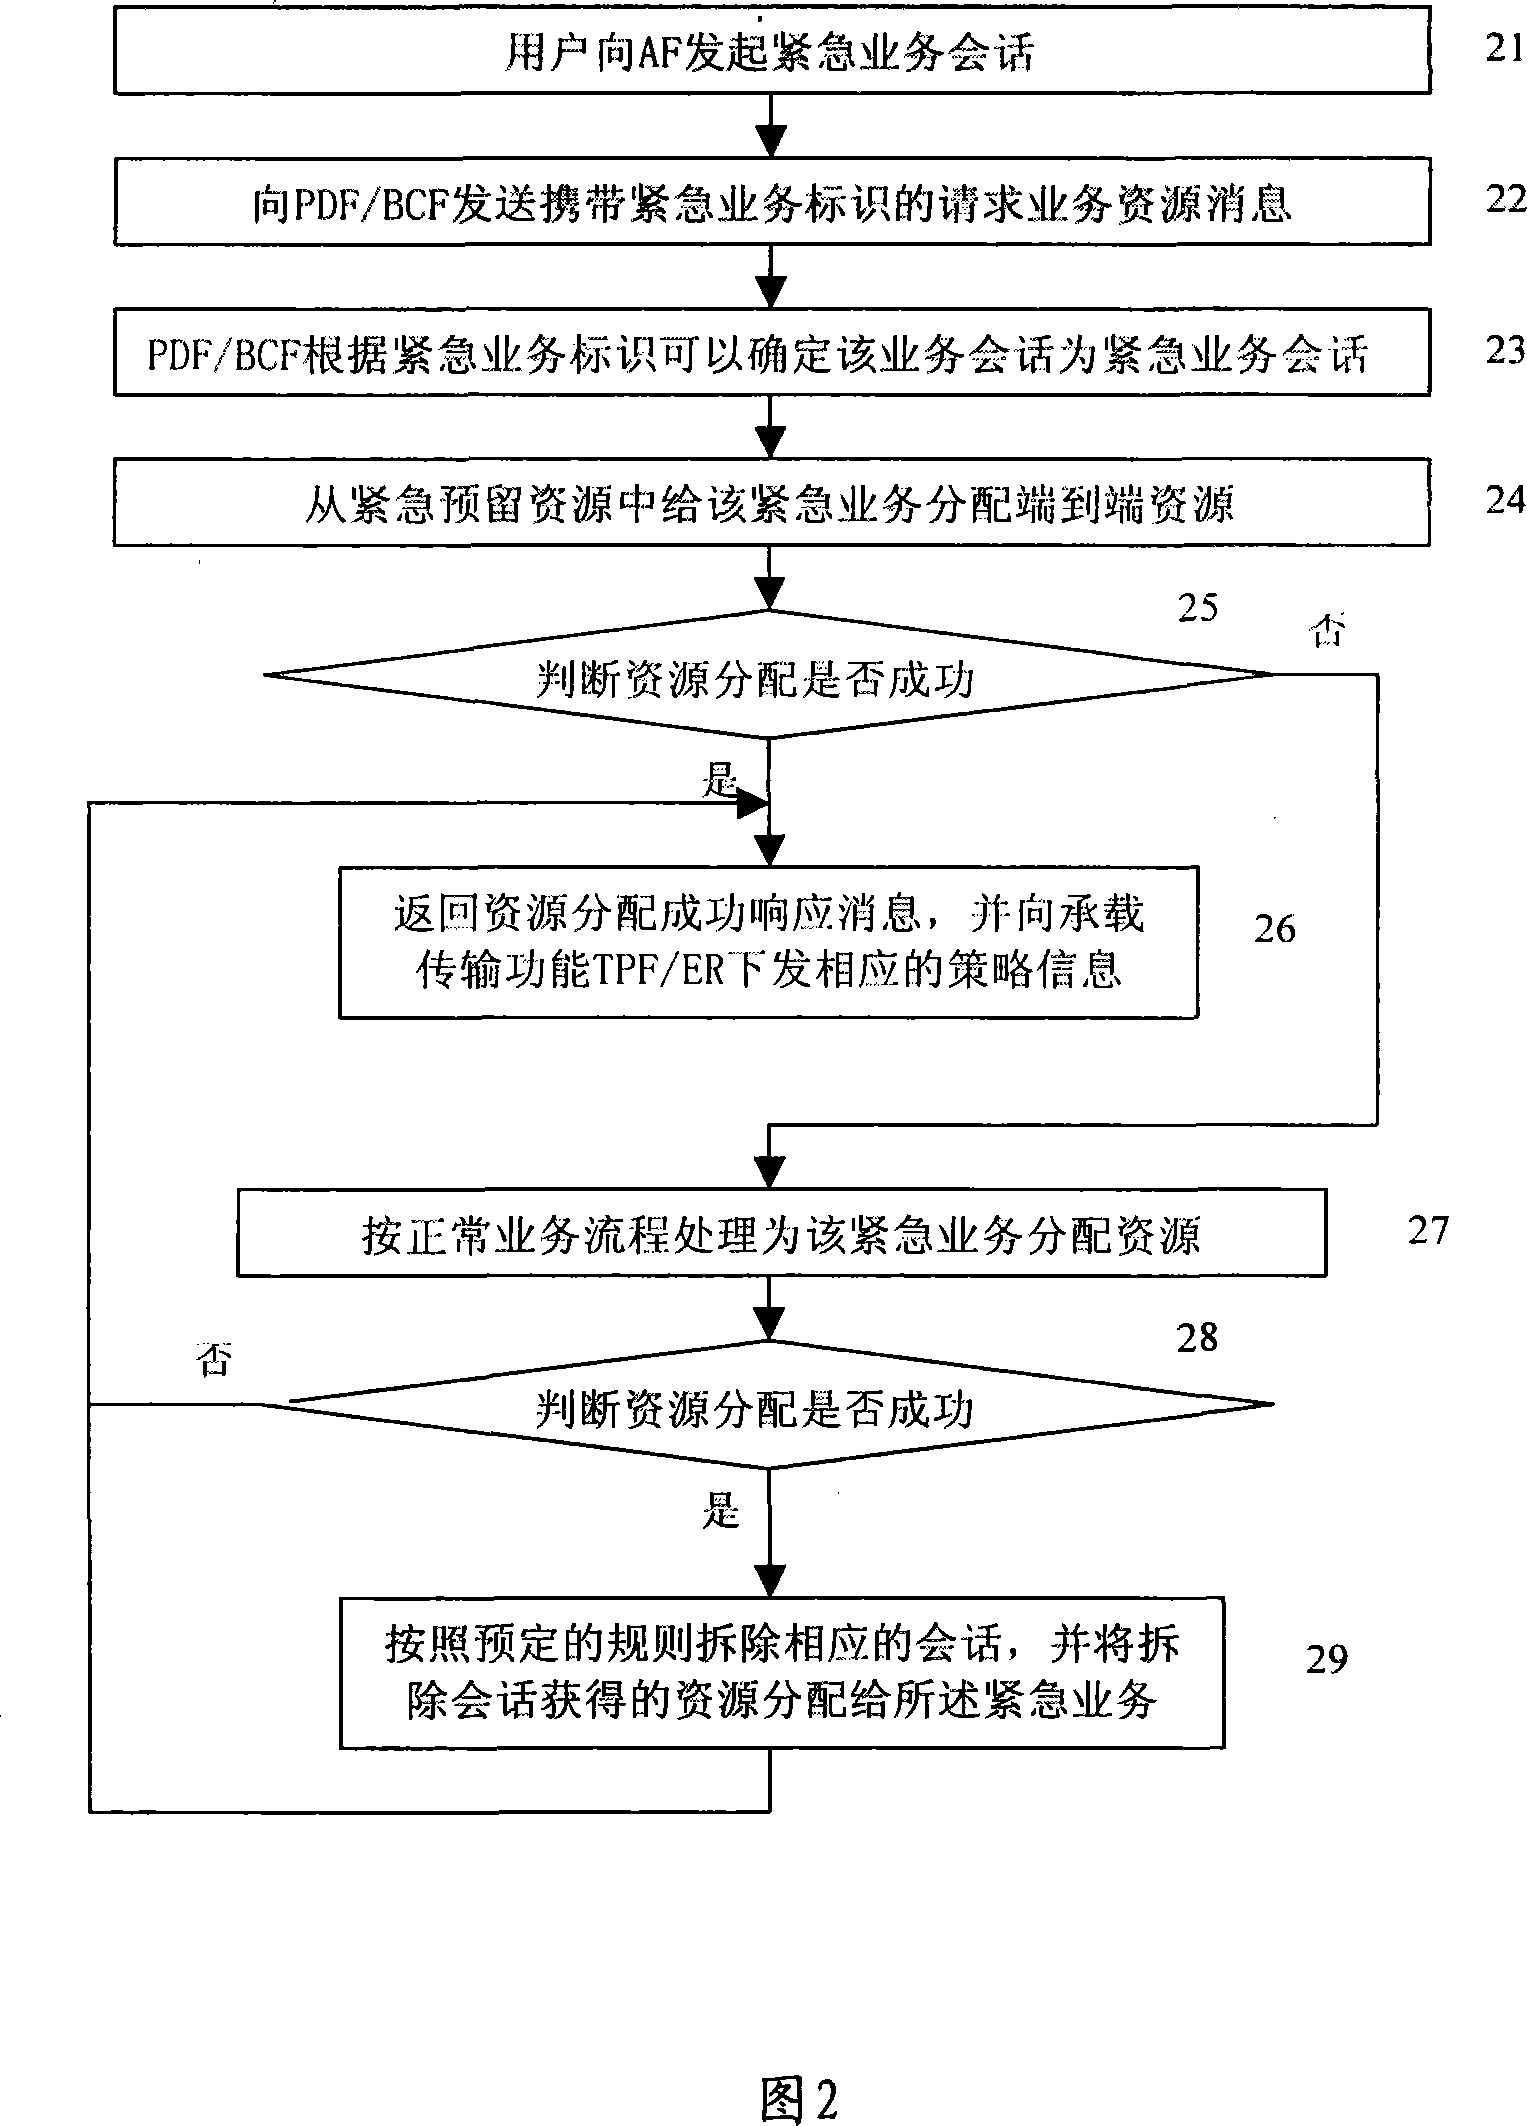 Method for processing emergent service in network communication